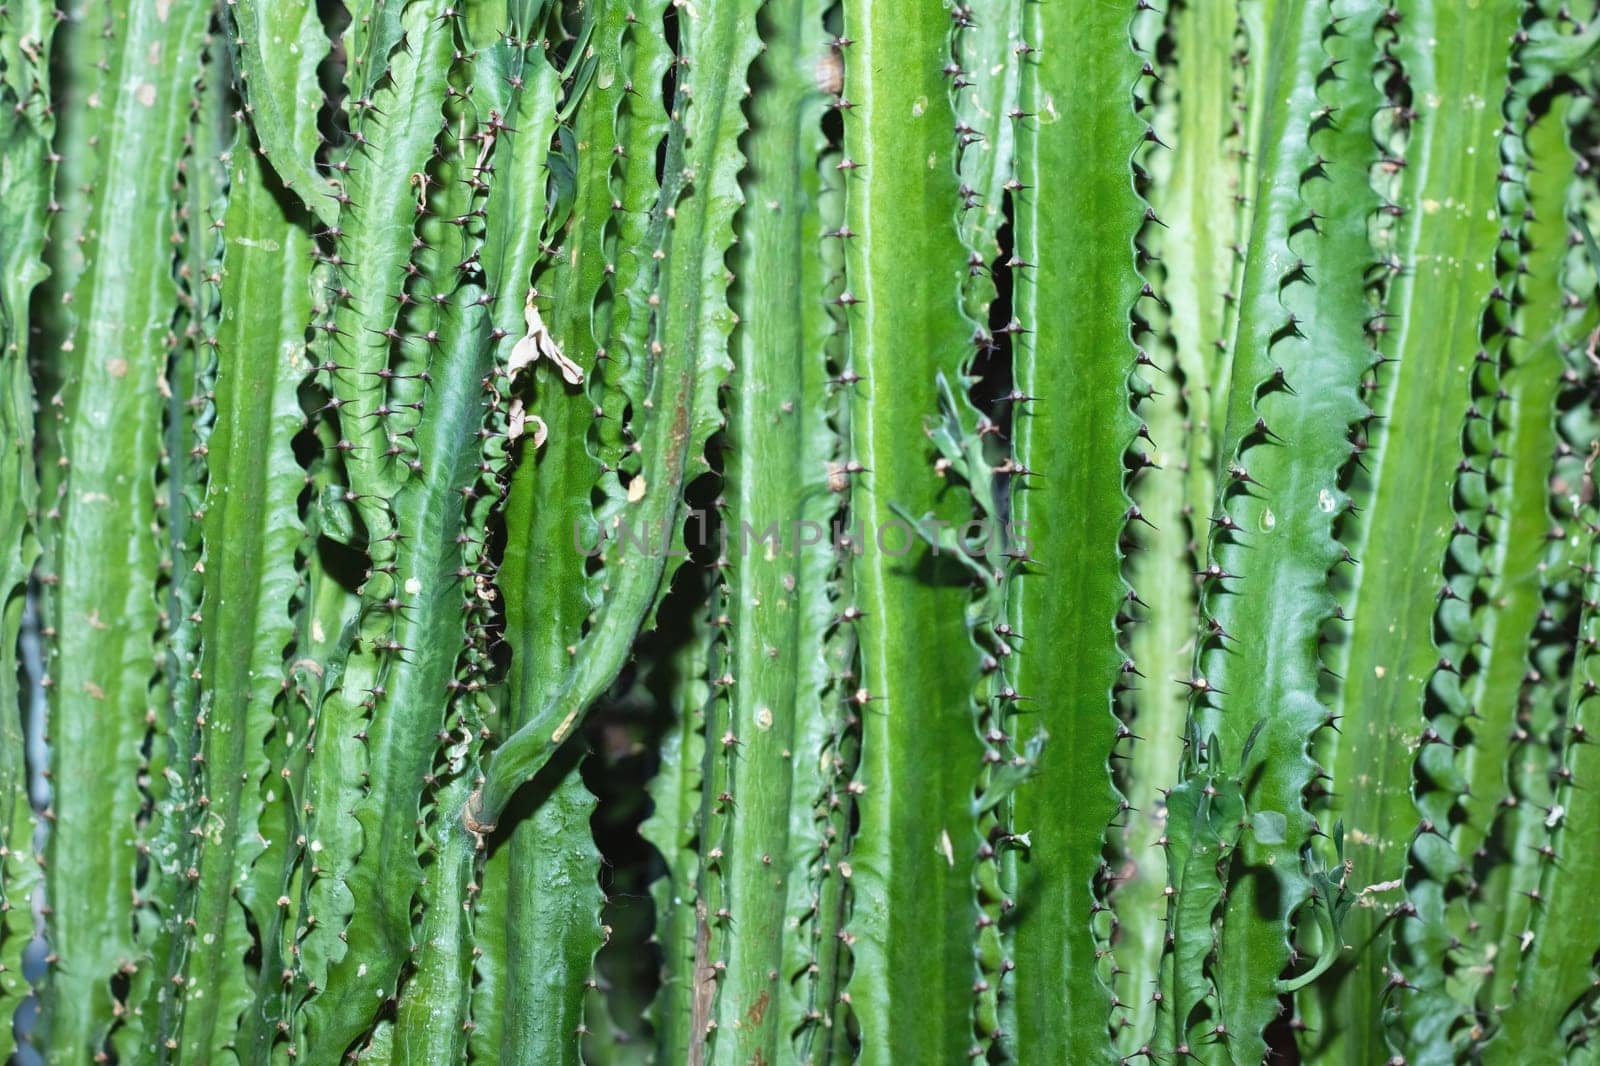 A close up of a terrestrial plant from the grass family, displaying an abundance of green leaves and thorns, showcasing the beauty of botany